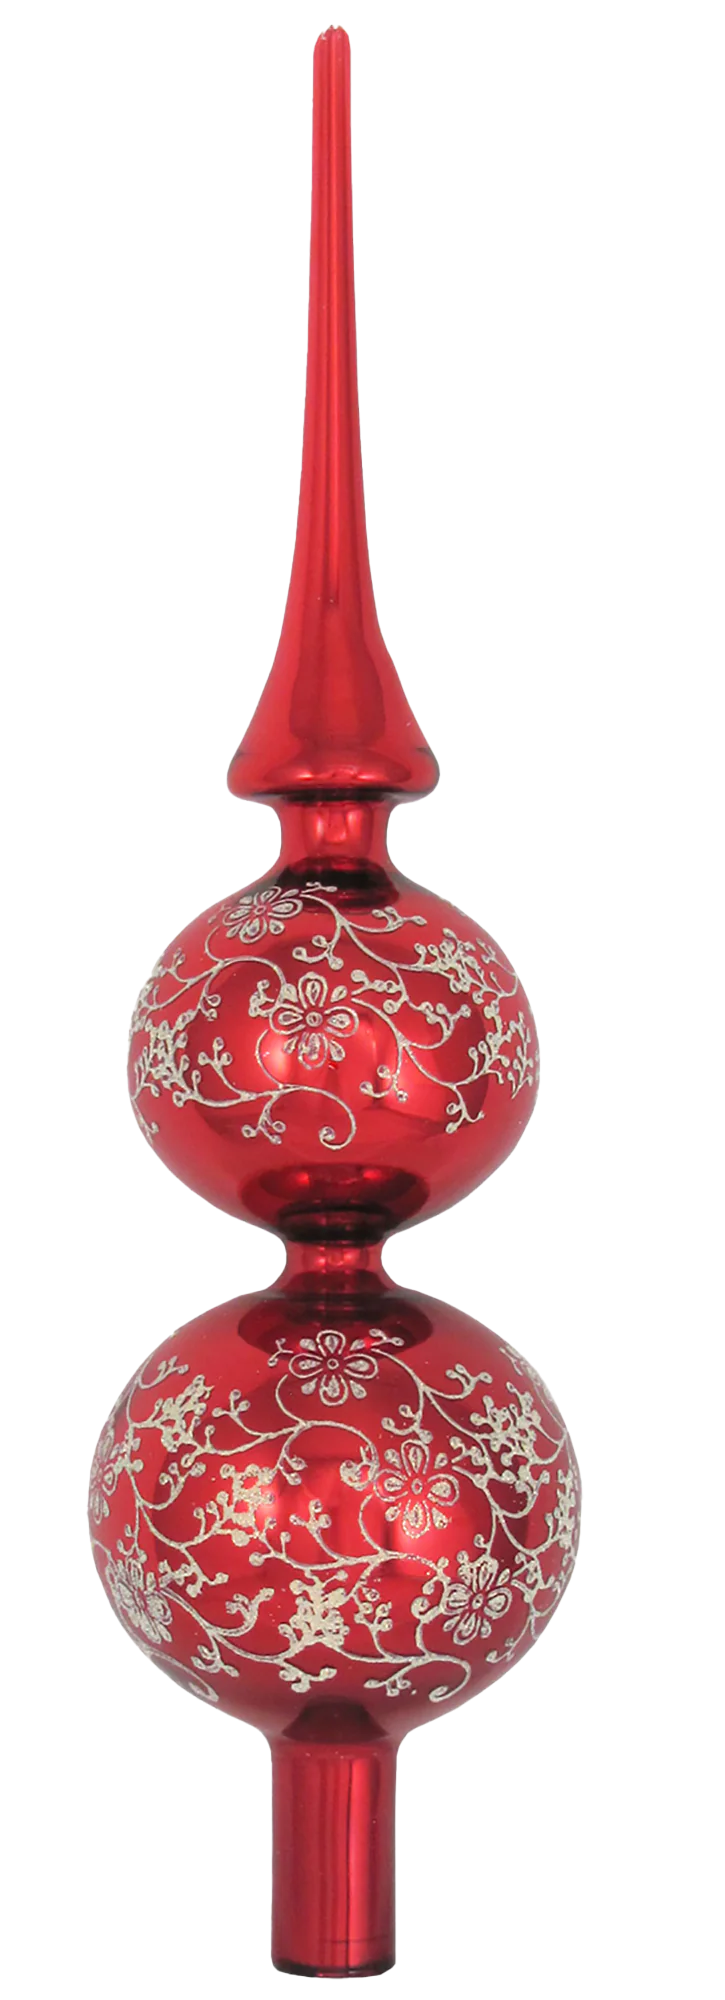 Red 13" Glass Treetopper with Gold Floral Glitterlace - Christmas Red